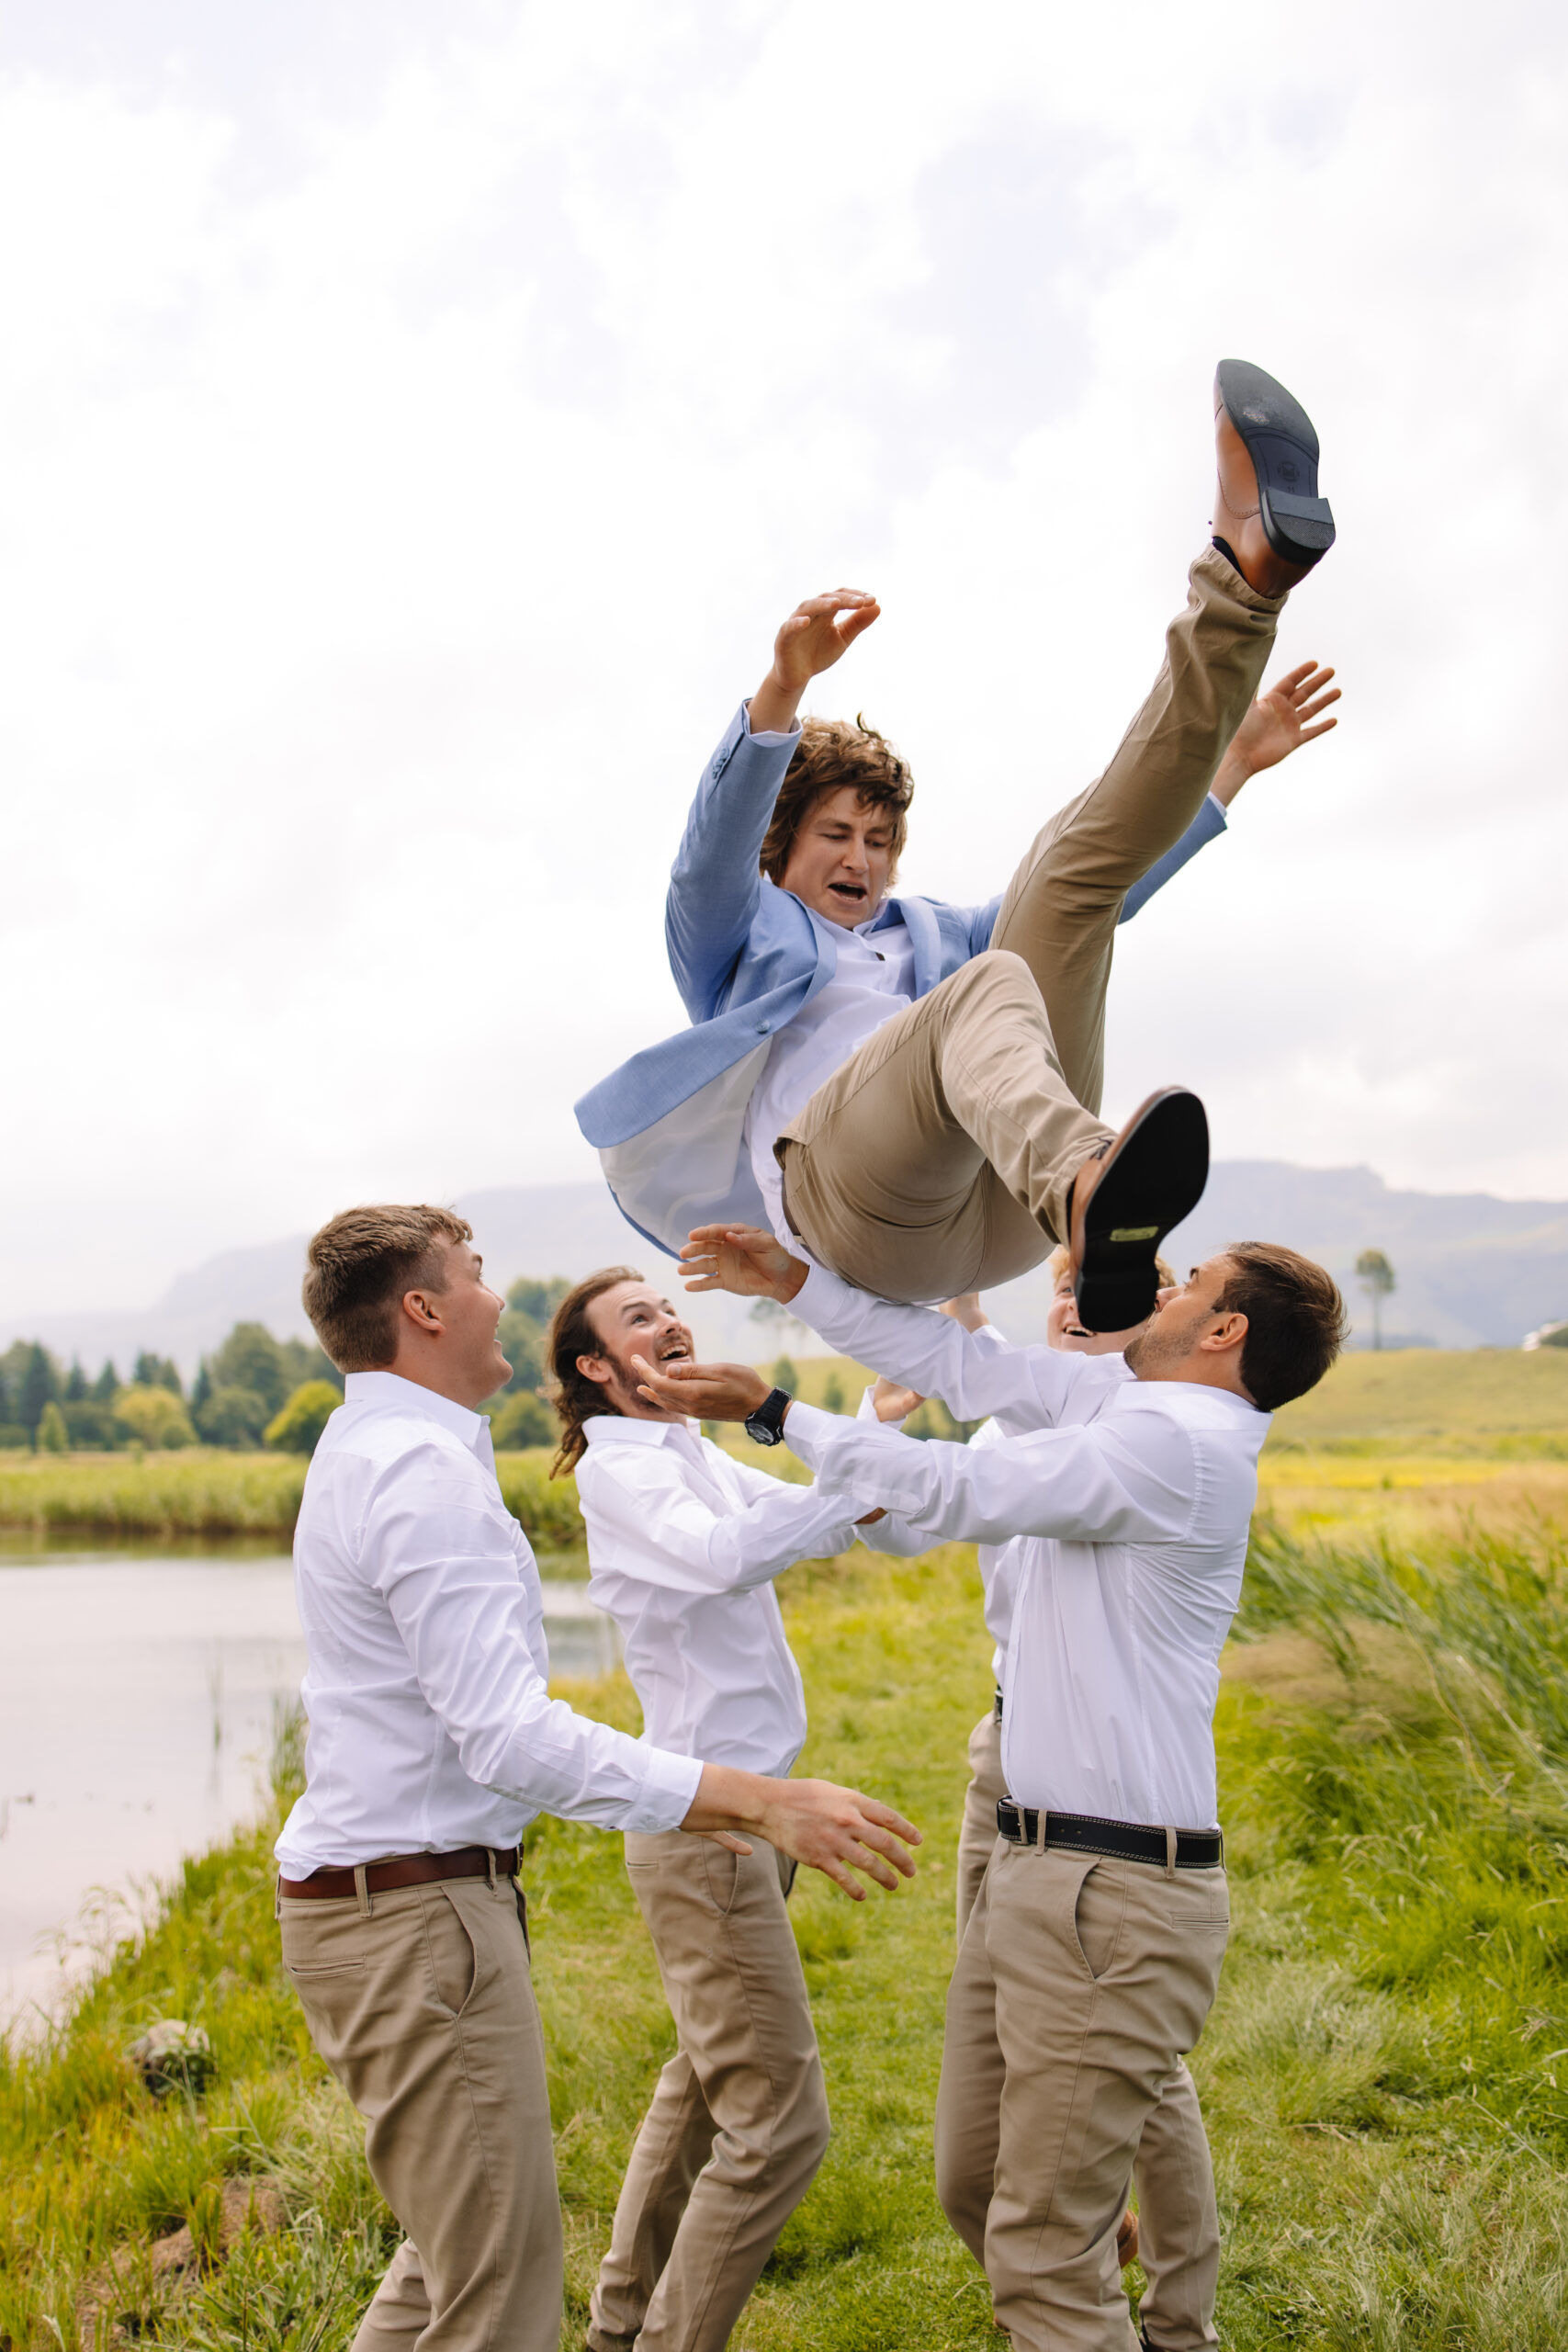 Groomsmen in white button up shirts and khaki pants throwing the groom in the air next to a lake.